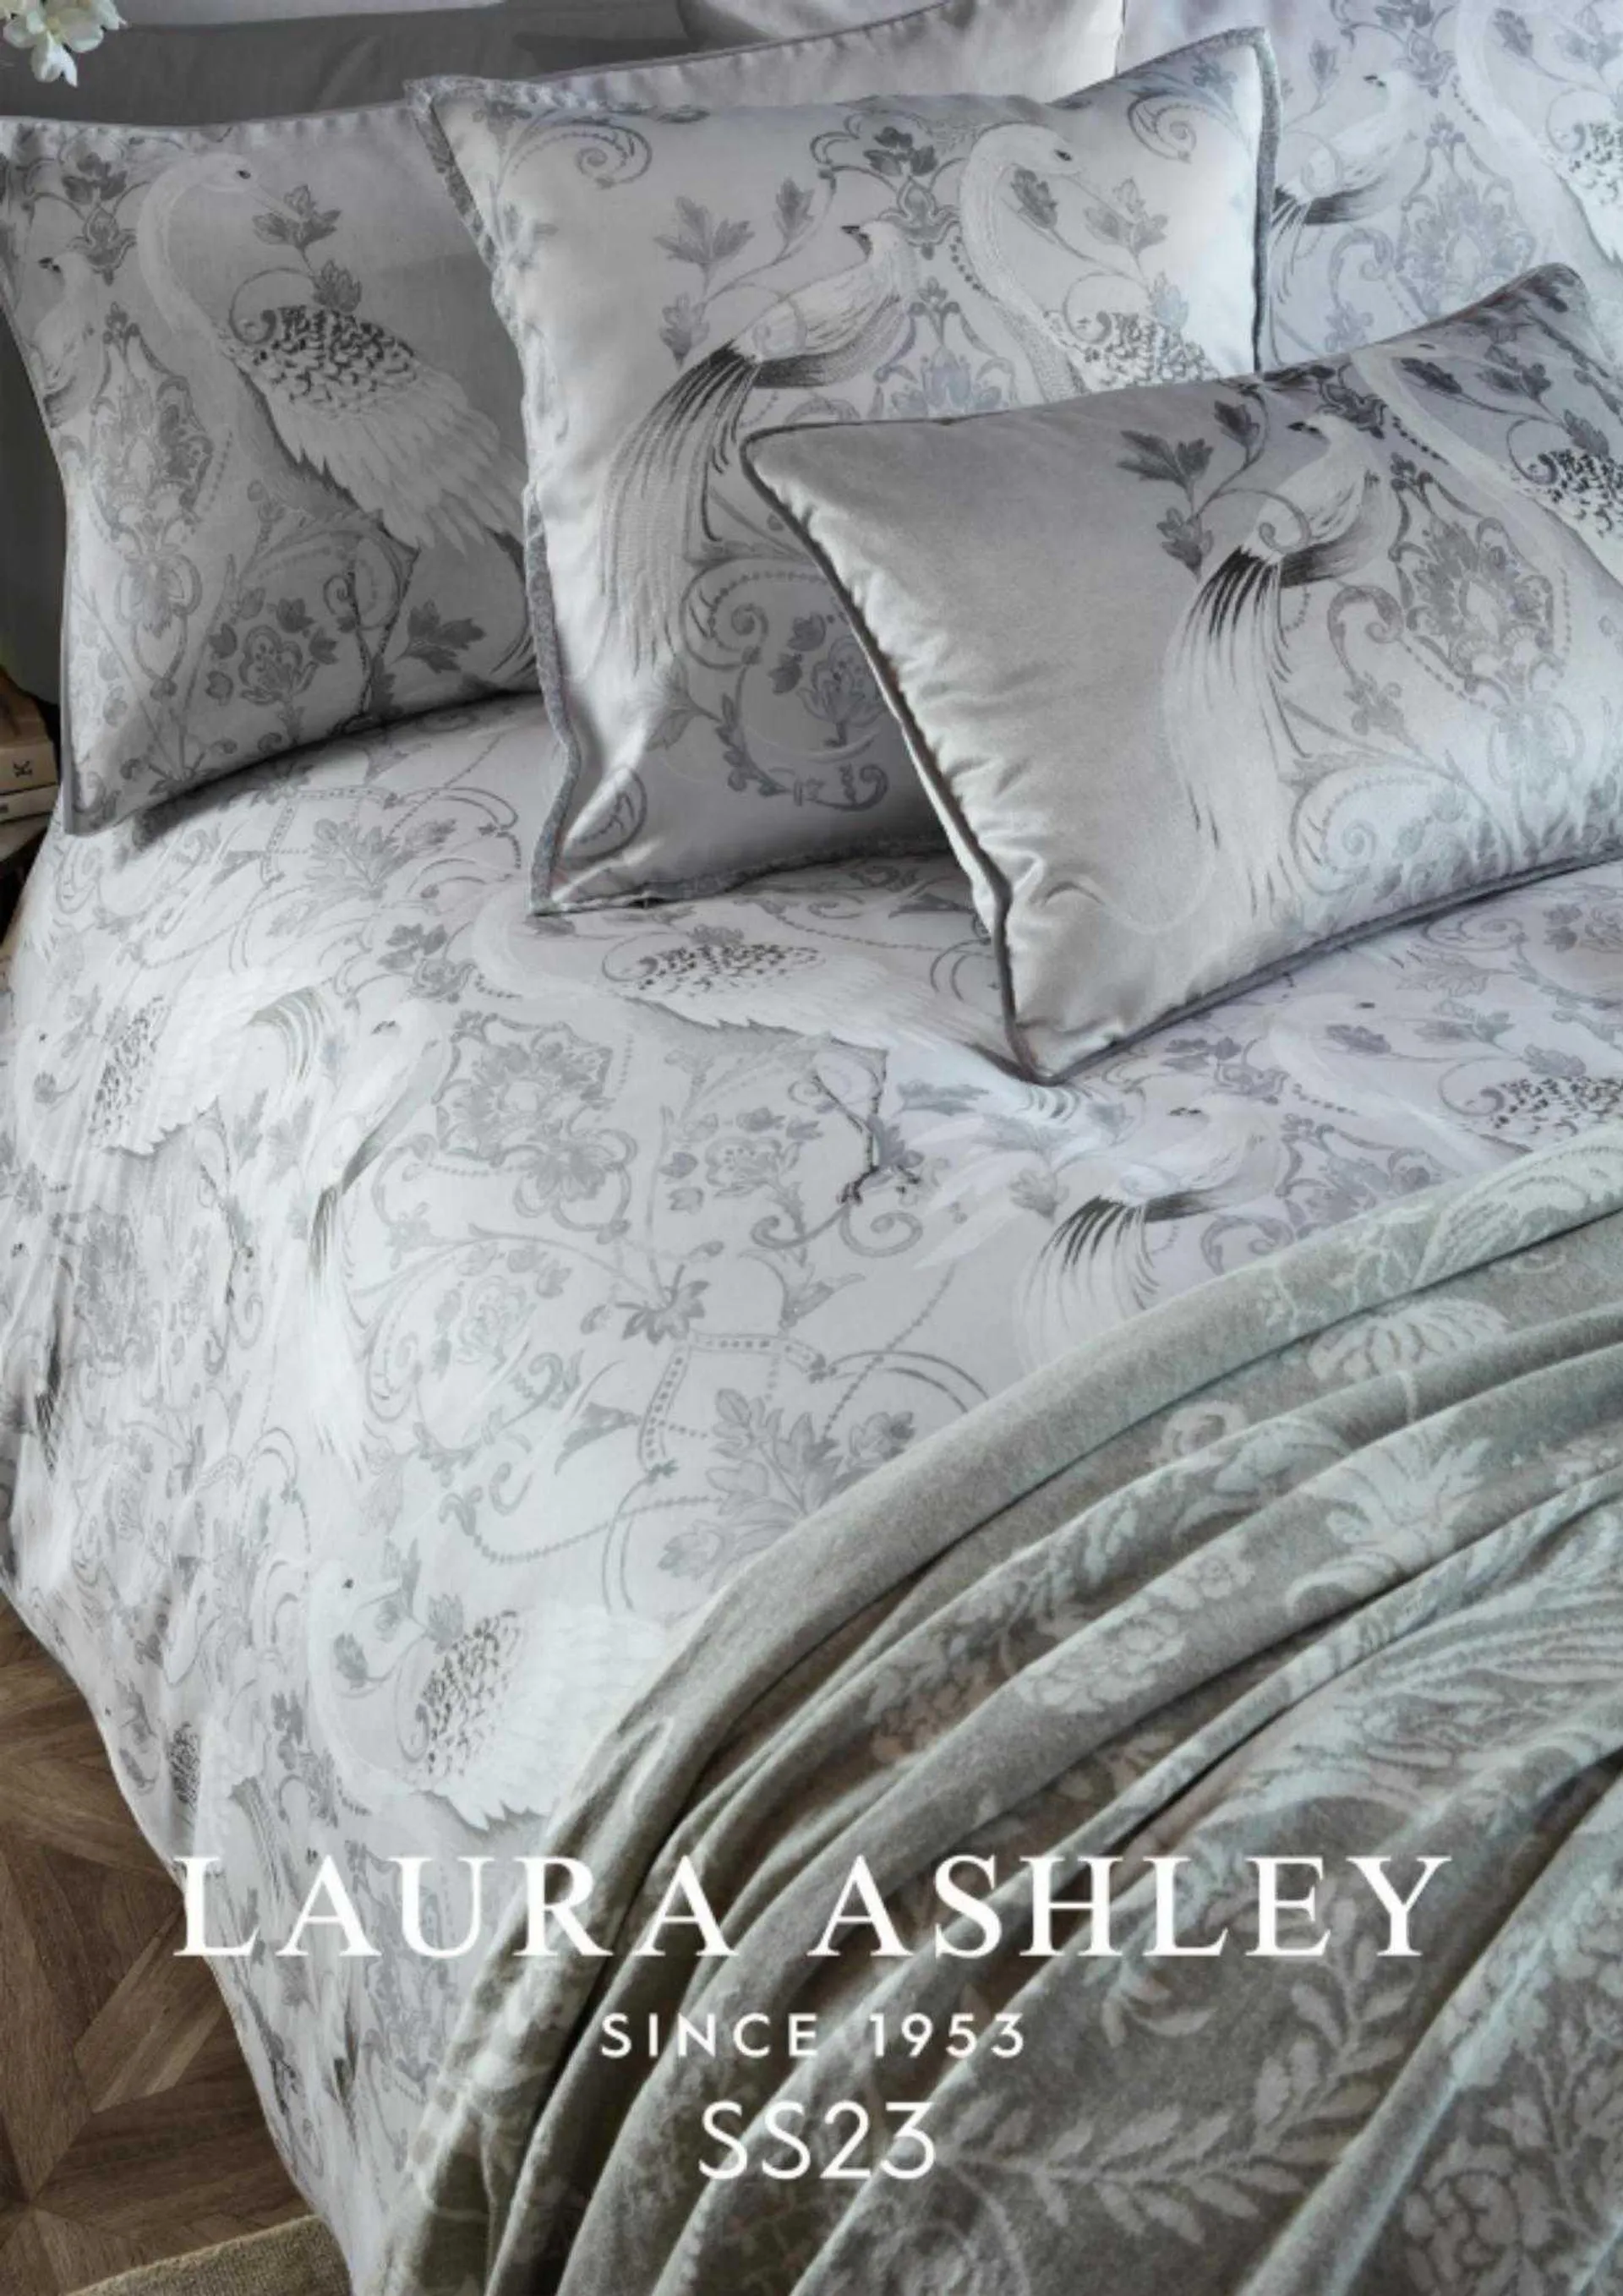 Laura Ashley Weekly Offers - 1